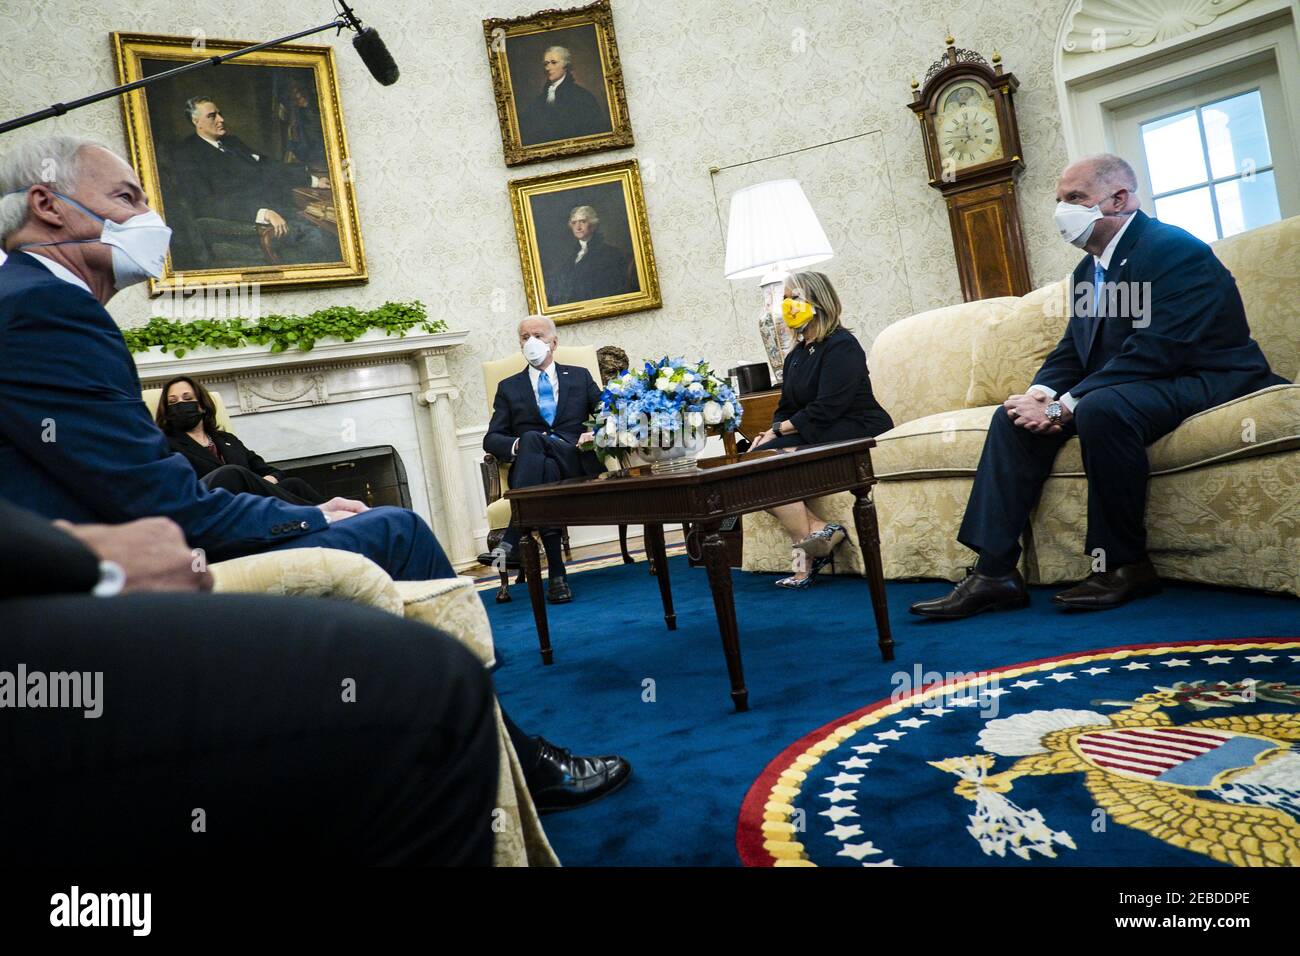 Washington, United States. 12th Feb, 2021. Governor Michelle Lujan Grisham (D-NM).Governor Larry Hogan (R-MD), (R) look on as President Joe Biden meets with governors and mayors to discuss the American Rescue Plan, which will provide aid to fight against COVID-19, in the Oval Office in Washington, DC, on Friday, Feb. 12, 2021. Pool photo by Pete Marovich/UPI Credit: UPI/Alamy Live News Stock Photo